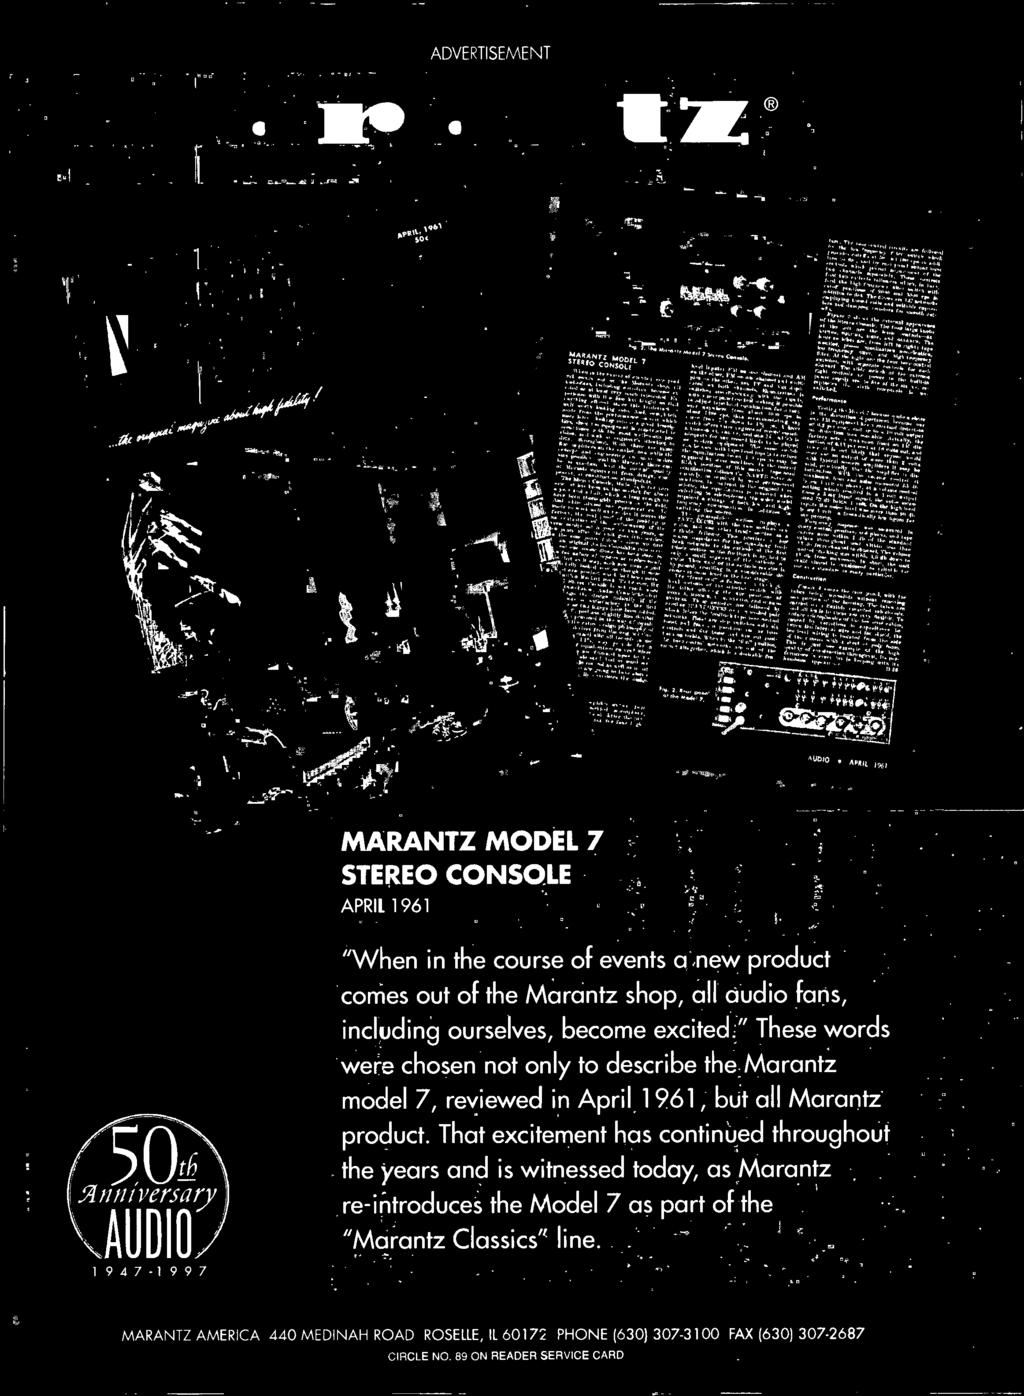 " These words were chosen not only to describe the Marantz model 7, reviewed in April 1961, but all Marantz